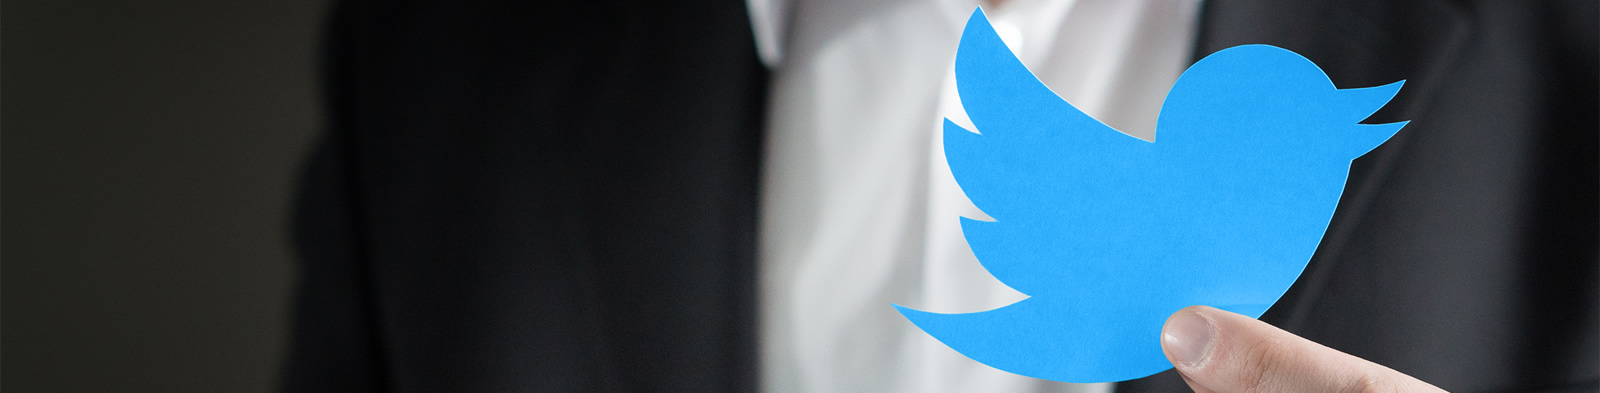 Corporate figure and Twitter logo